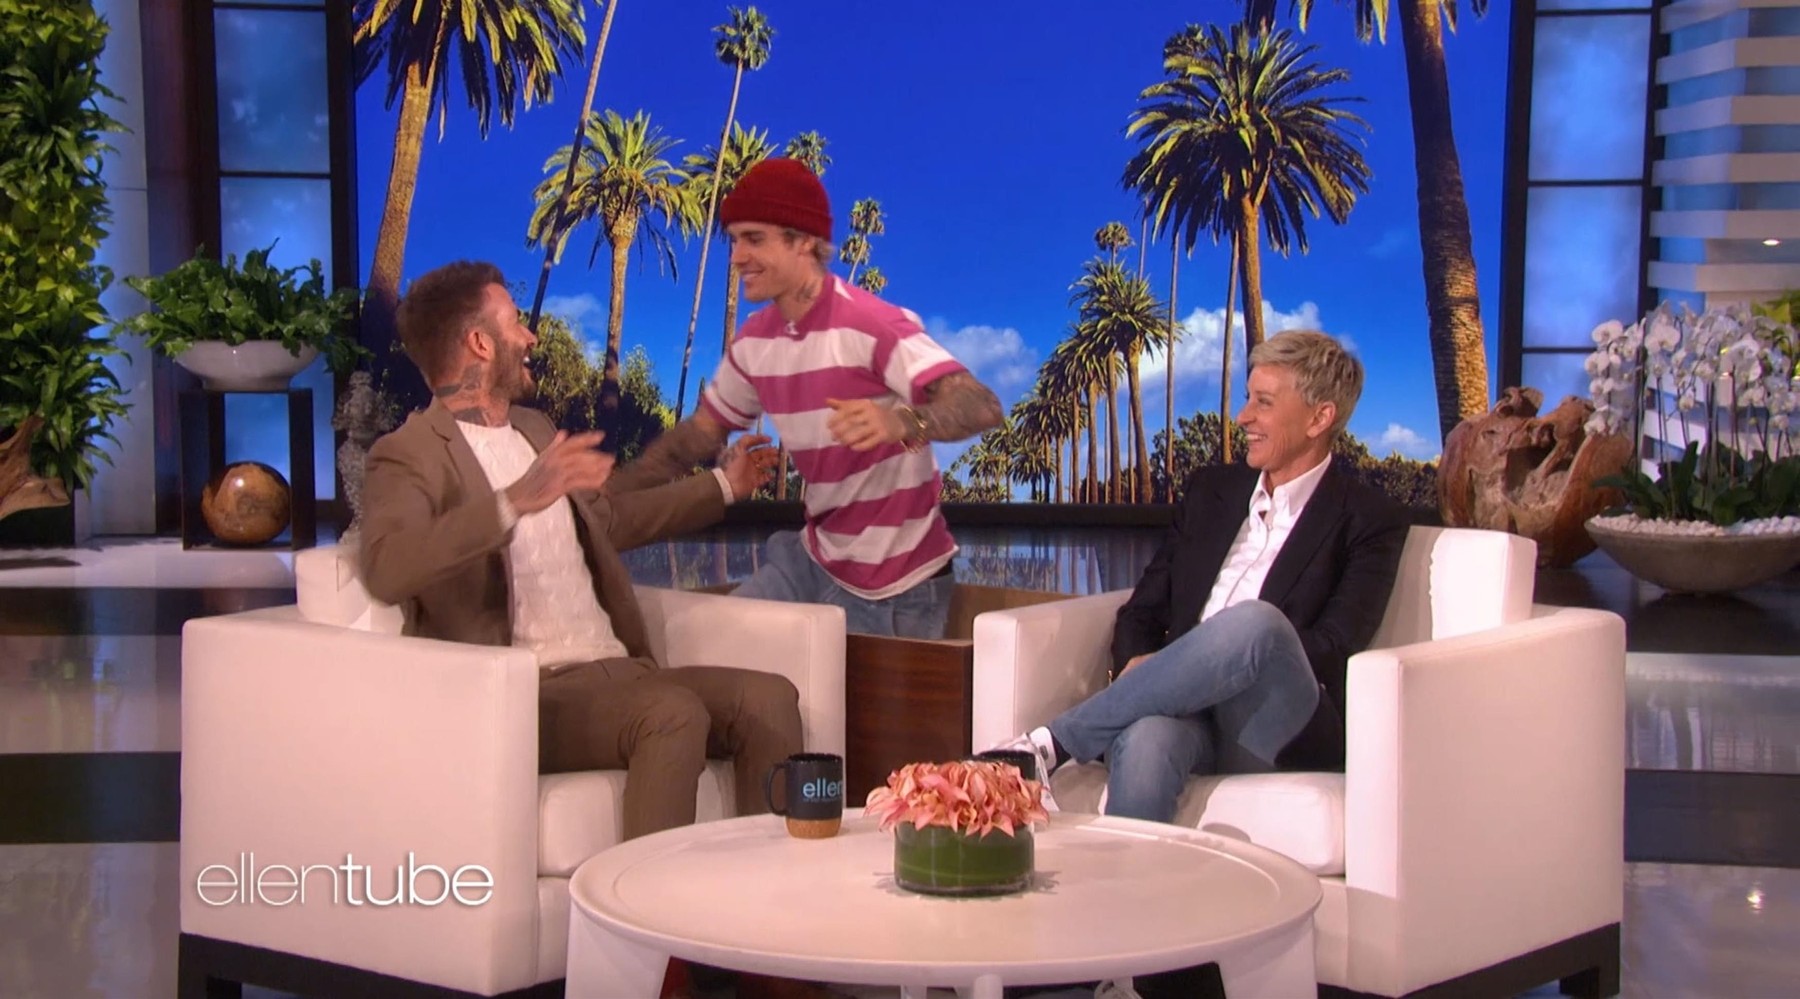 Los Angeles, CA  - Justin Bieber tries to scare David Beckham on The Ellen Show. The former soccer star was on the show to chat about his new Miami soccer team but also spoke about his  eight year-old daughter Harper, and how his 15 year-old son Cruz is starting to play the mandolin that David bought him for . He also spoke about guest-starring on Modern Family and revealed he’s not into exploring acting as a career. But it was while he was chatting about trick-or-treating at Justin Bieber‘s house last Halloween that the Yummy singer himself hilariously jumped out of a coffee table next to Beckham, trying to scare him. As Bieber screamed in his face, Beckham seemed almost unfazed by the prank before bursting into laughter. He then jumped up and hugged Bieber, before the singer ran off backstage. Chatting about Bieber before the scare, Beckham revealed: 